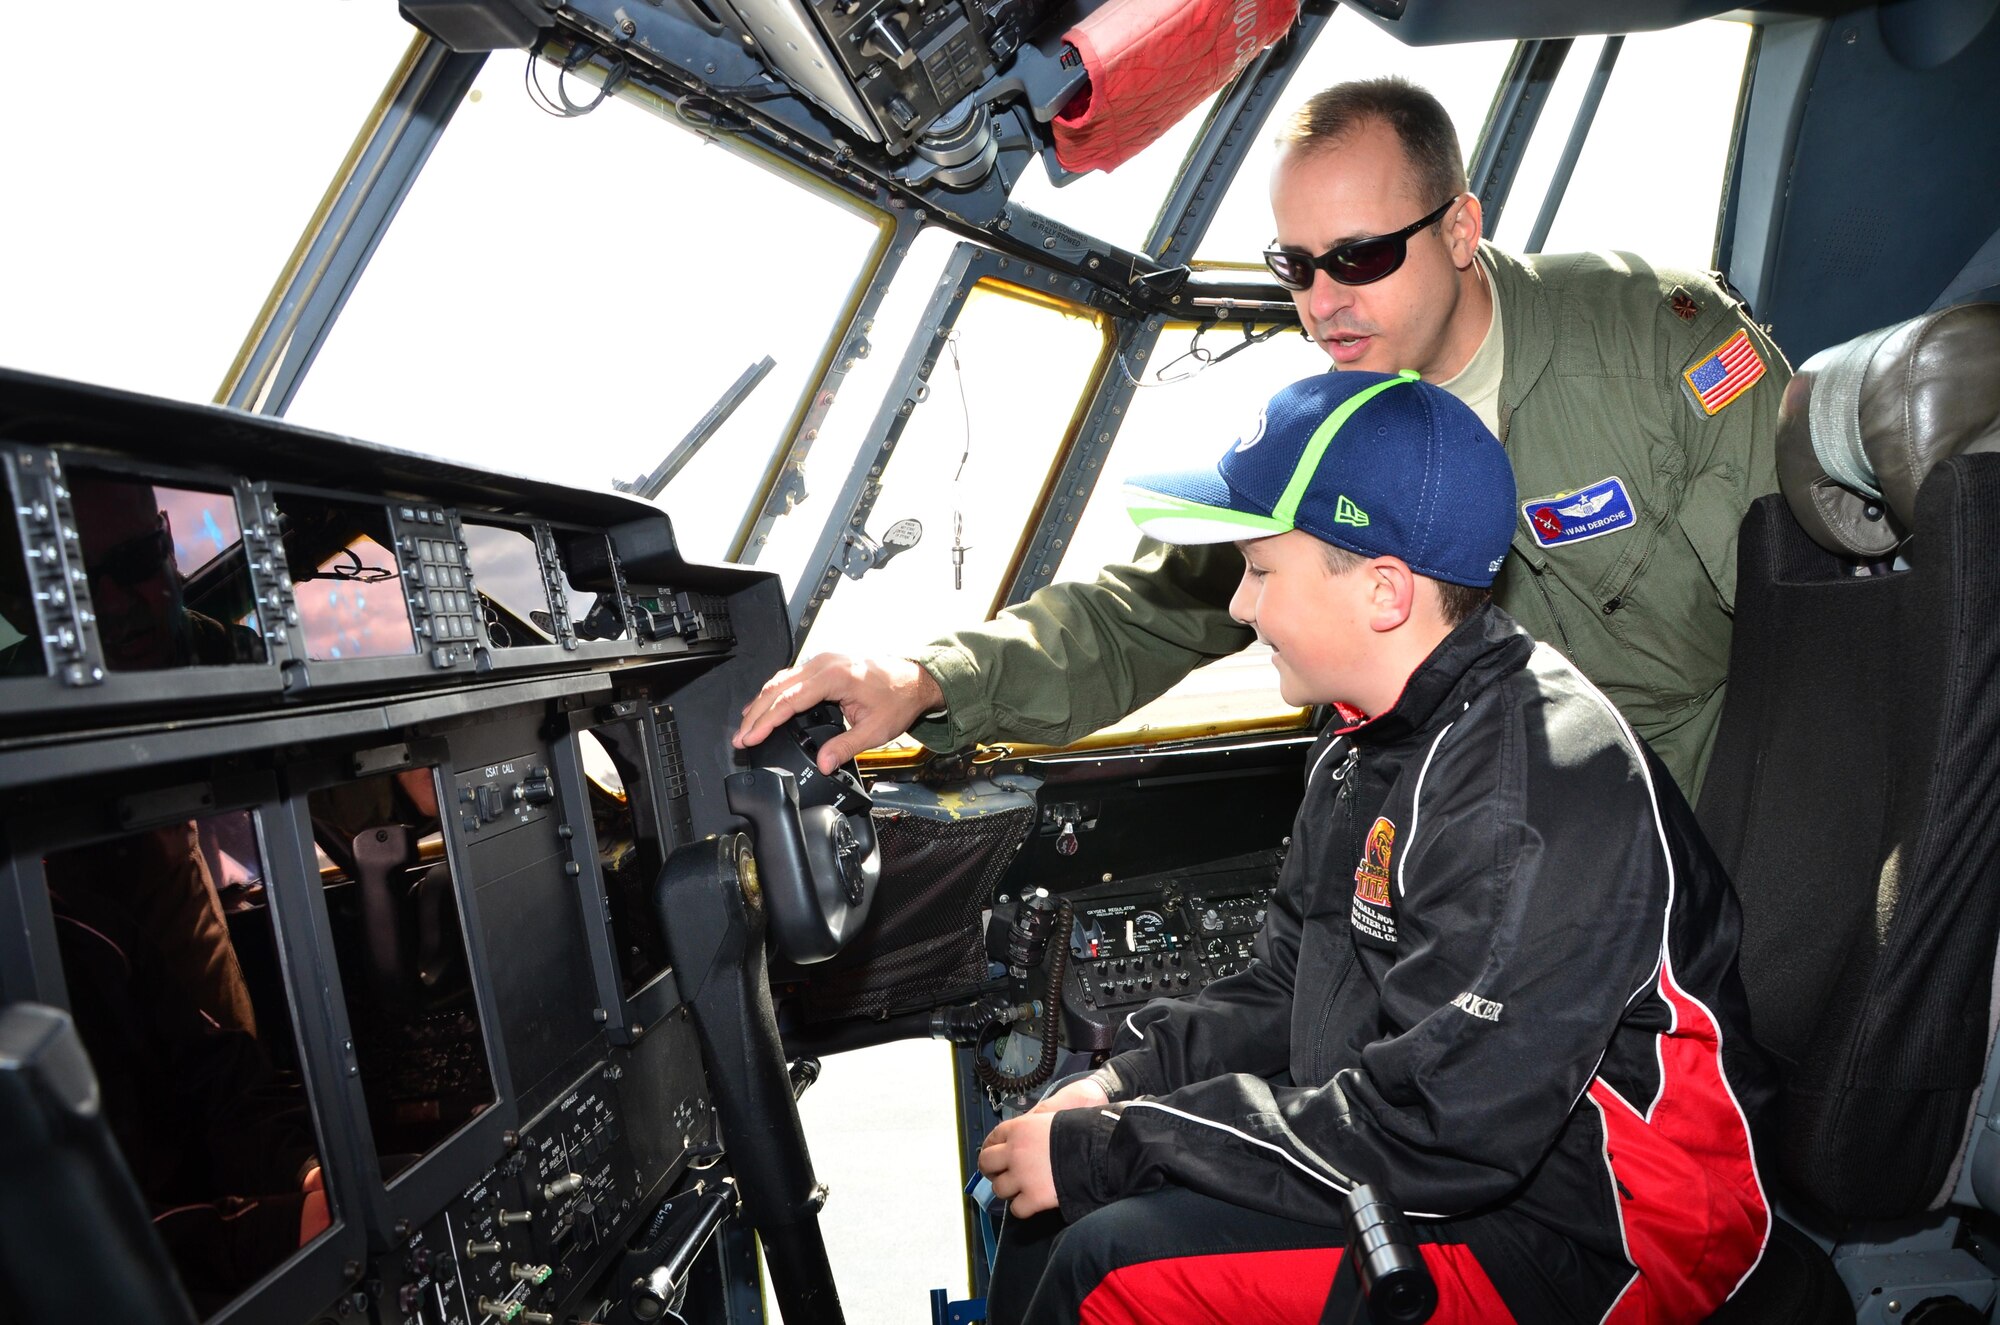 Maj. Ivan DeRoche, a pilot with the 53rd Weather Reconnaissance Squadron Hurricane Hunters, explains the flight controls to a young visitor during the Halifax, Nova Scotia stop of the 2015 Hurricane Awareness Tour May 3.